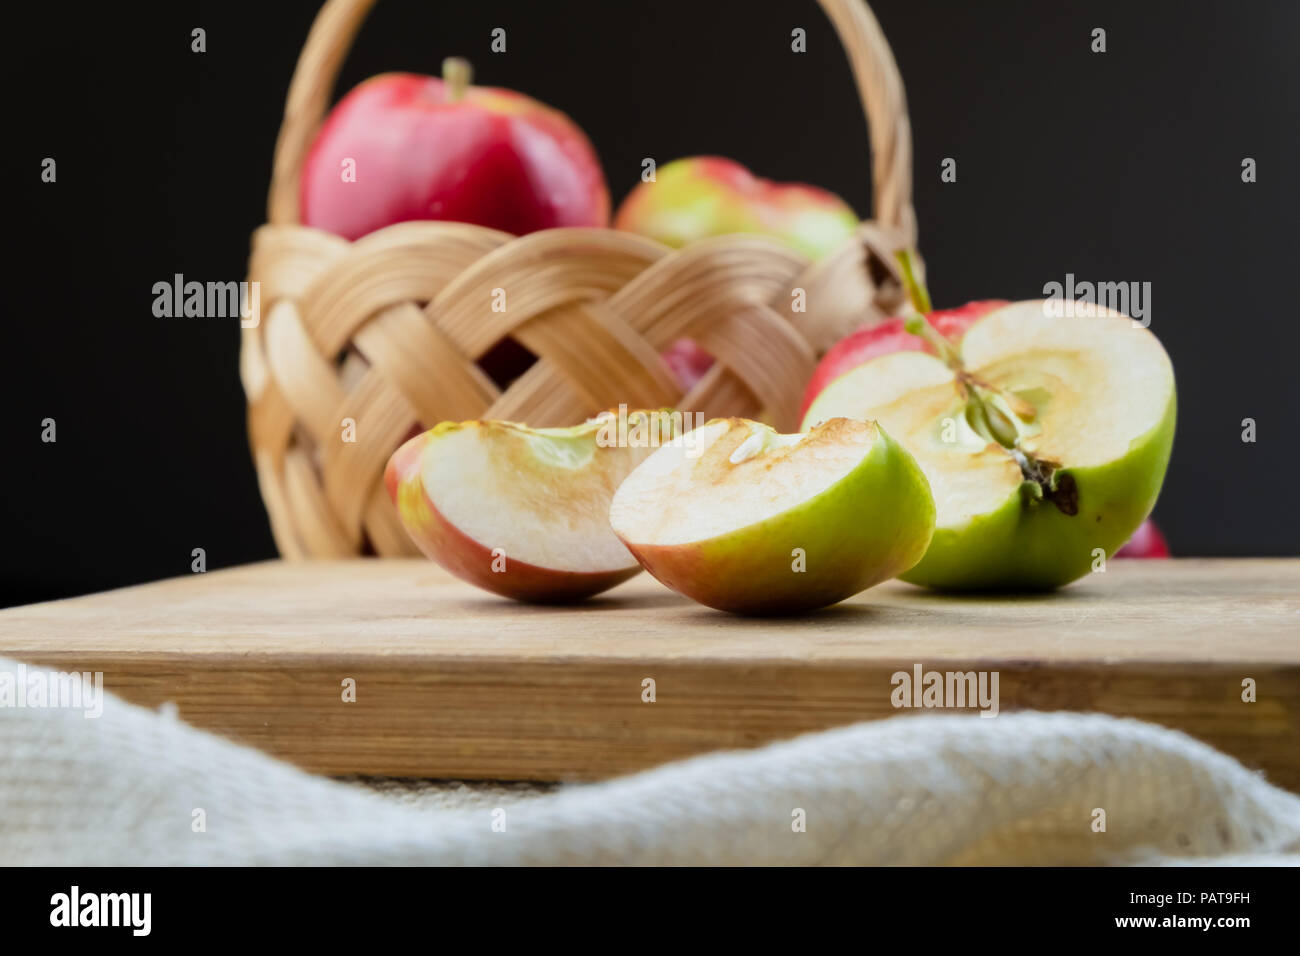 Close-up of ripe juicy apples on wooden table. Home grown organic apples cut in half Stock Photo